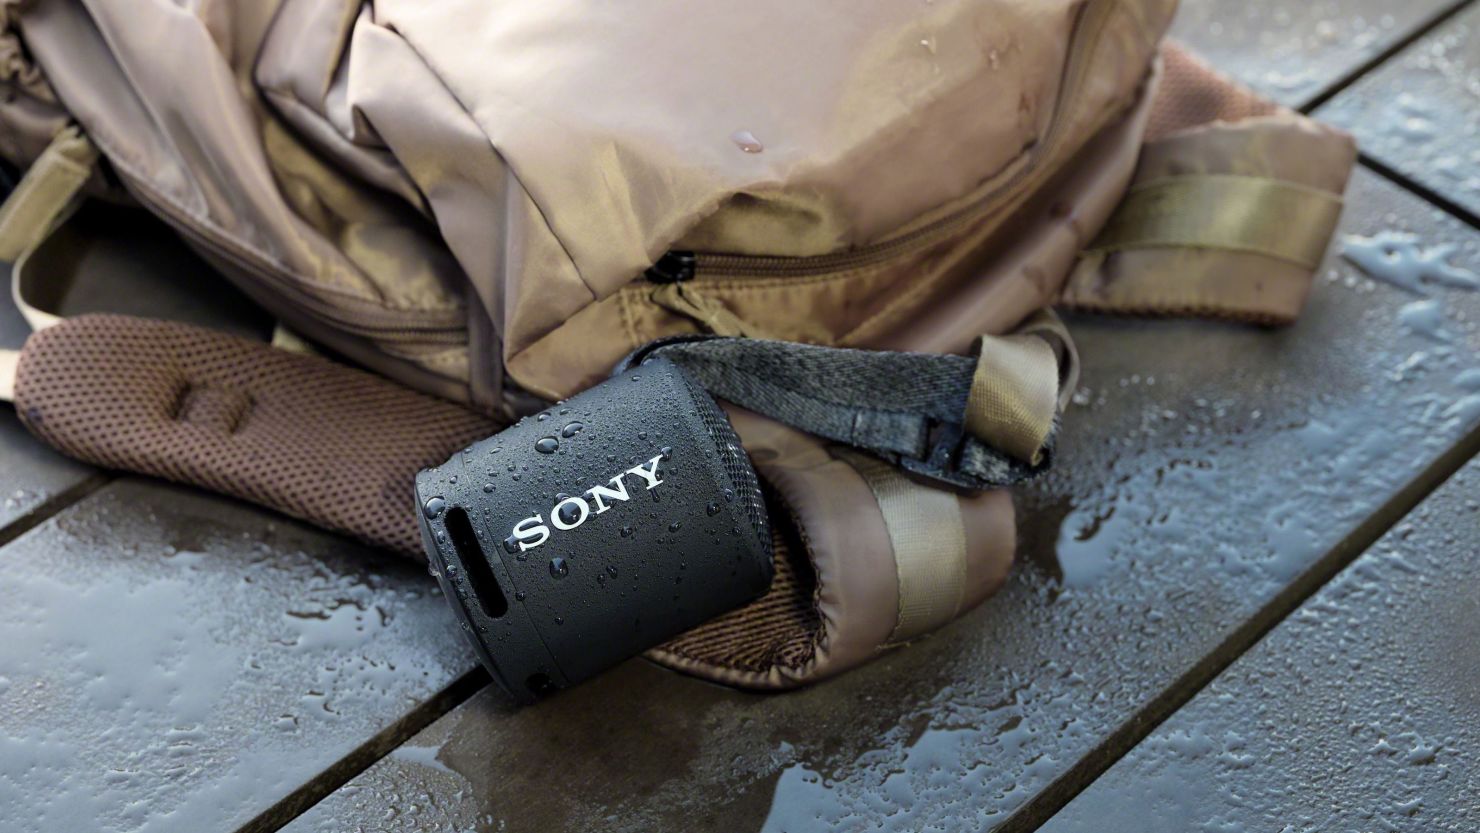  Sony All in One Compact Design Pocket Size Portable AM